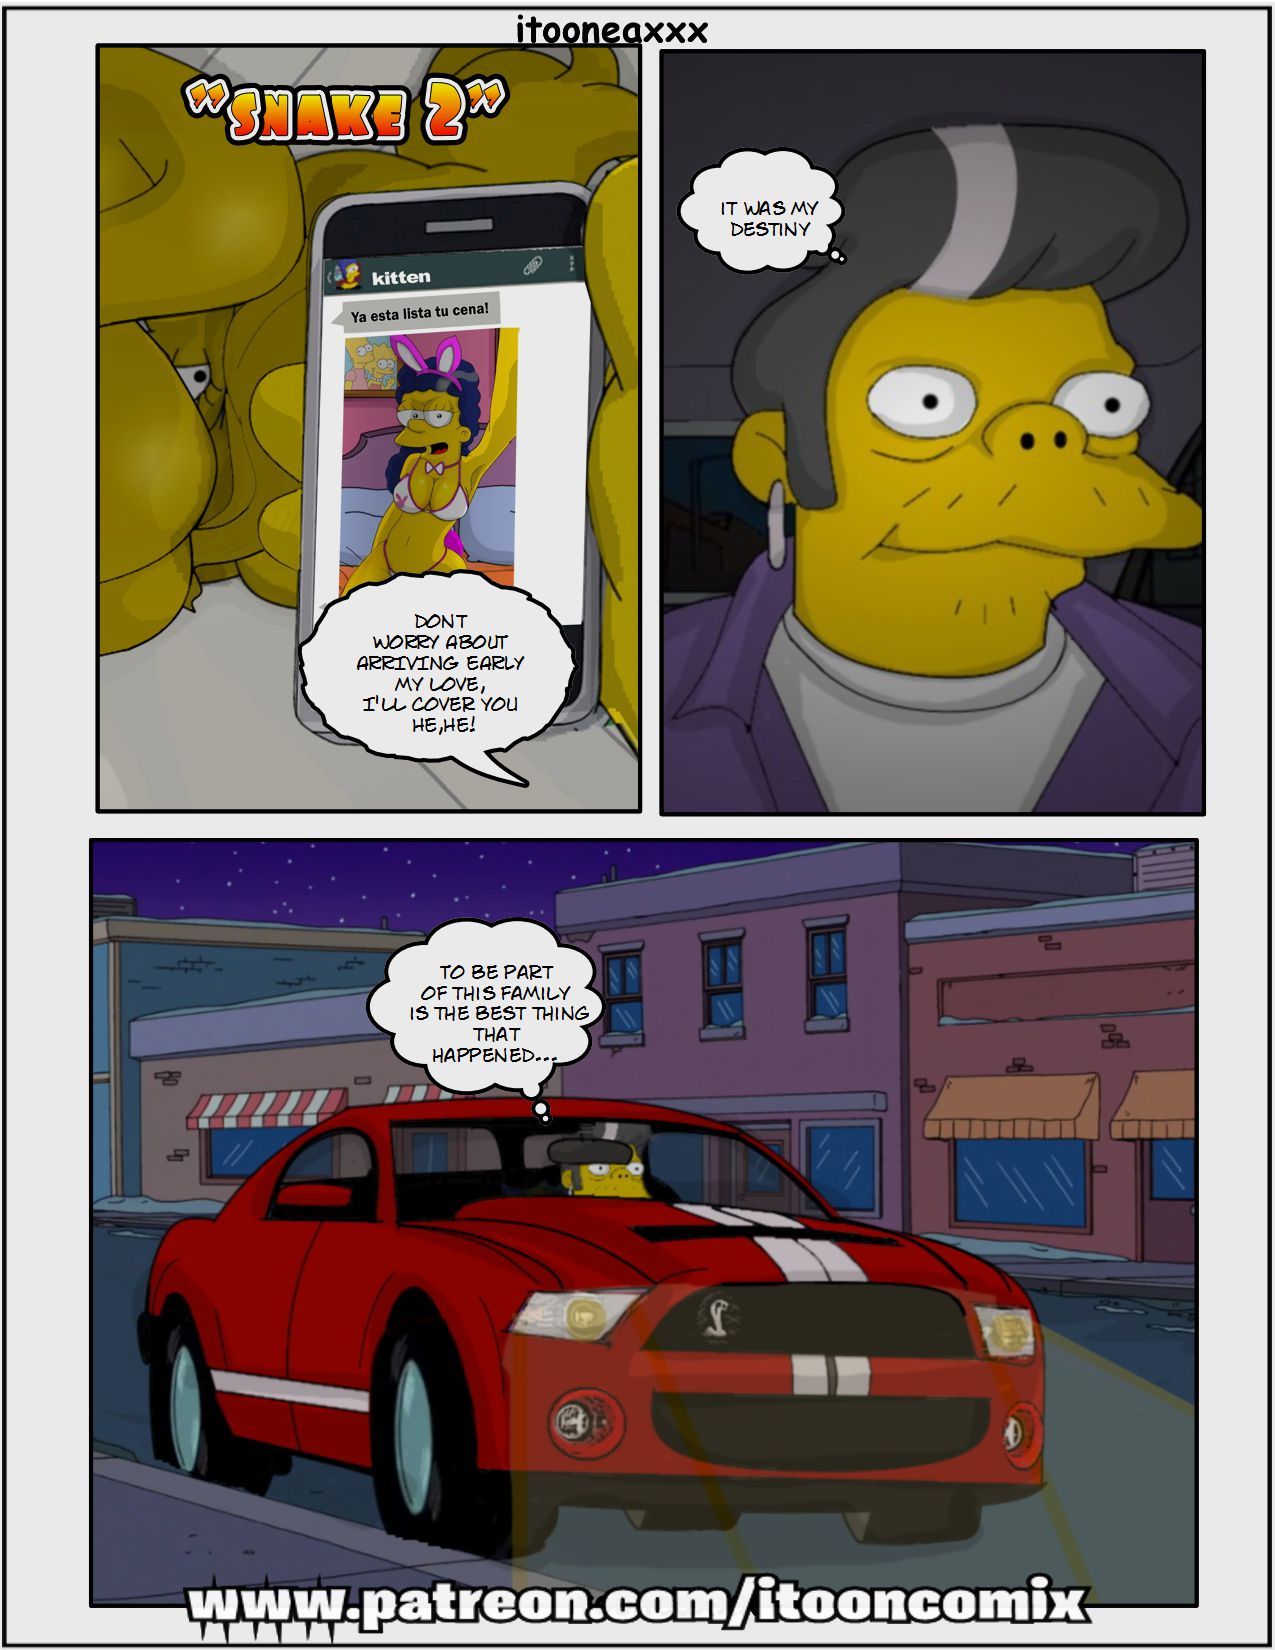 Snake 2 – The Simpsons by Itooneaxxx